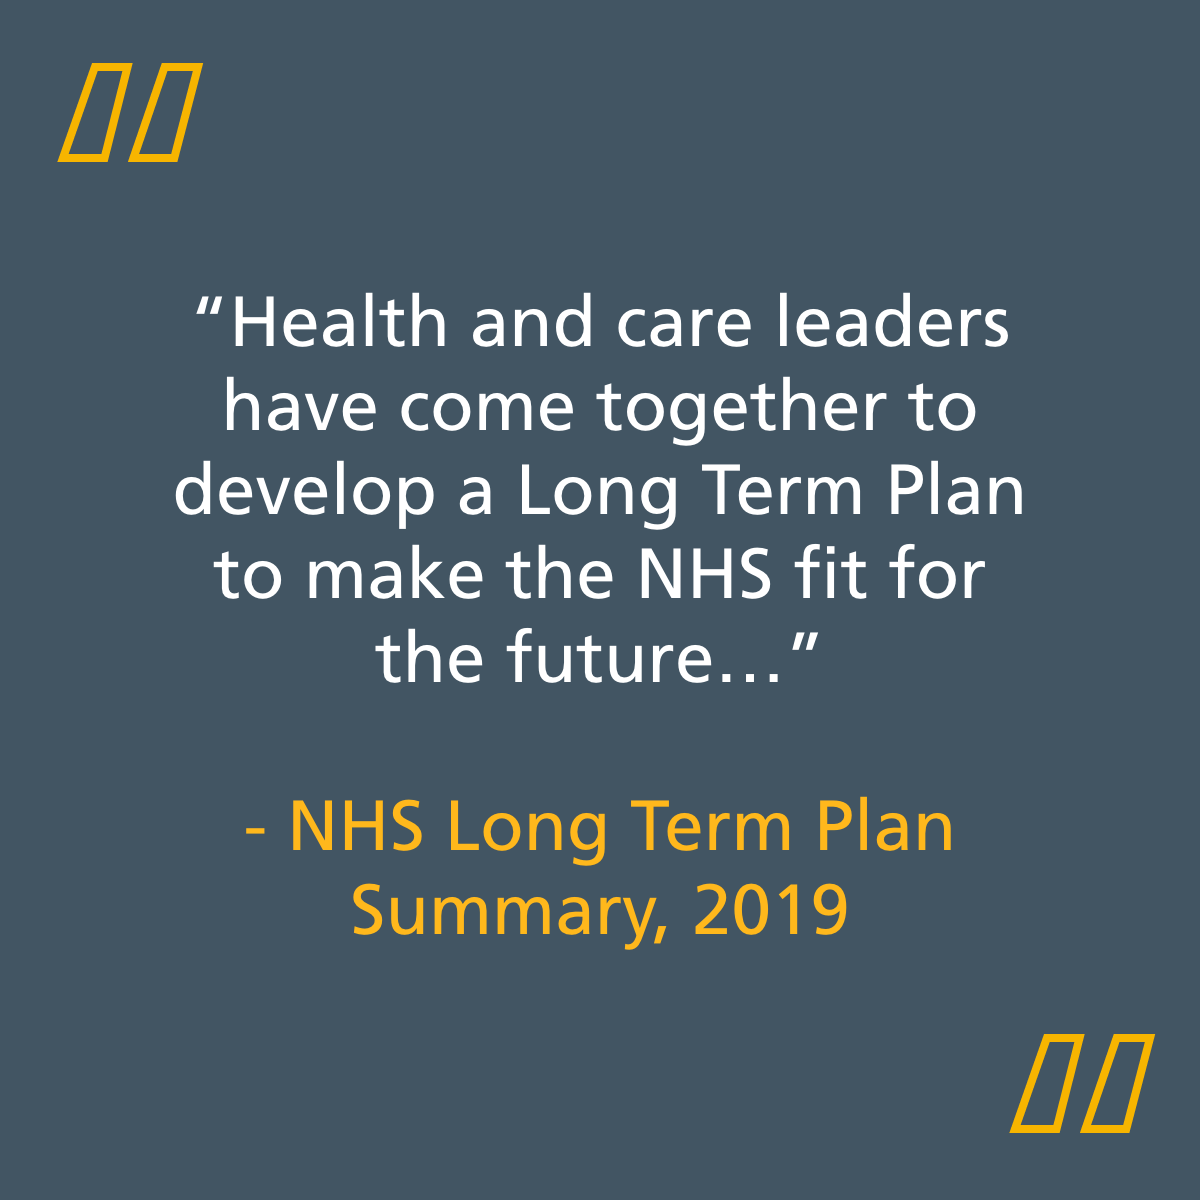 NHS long term summary plan quote